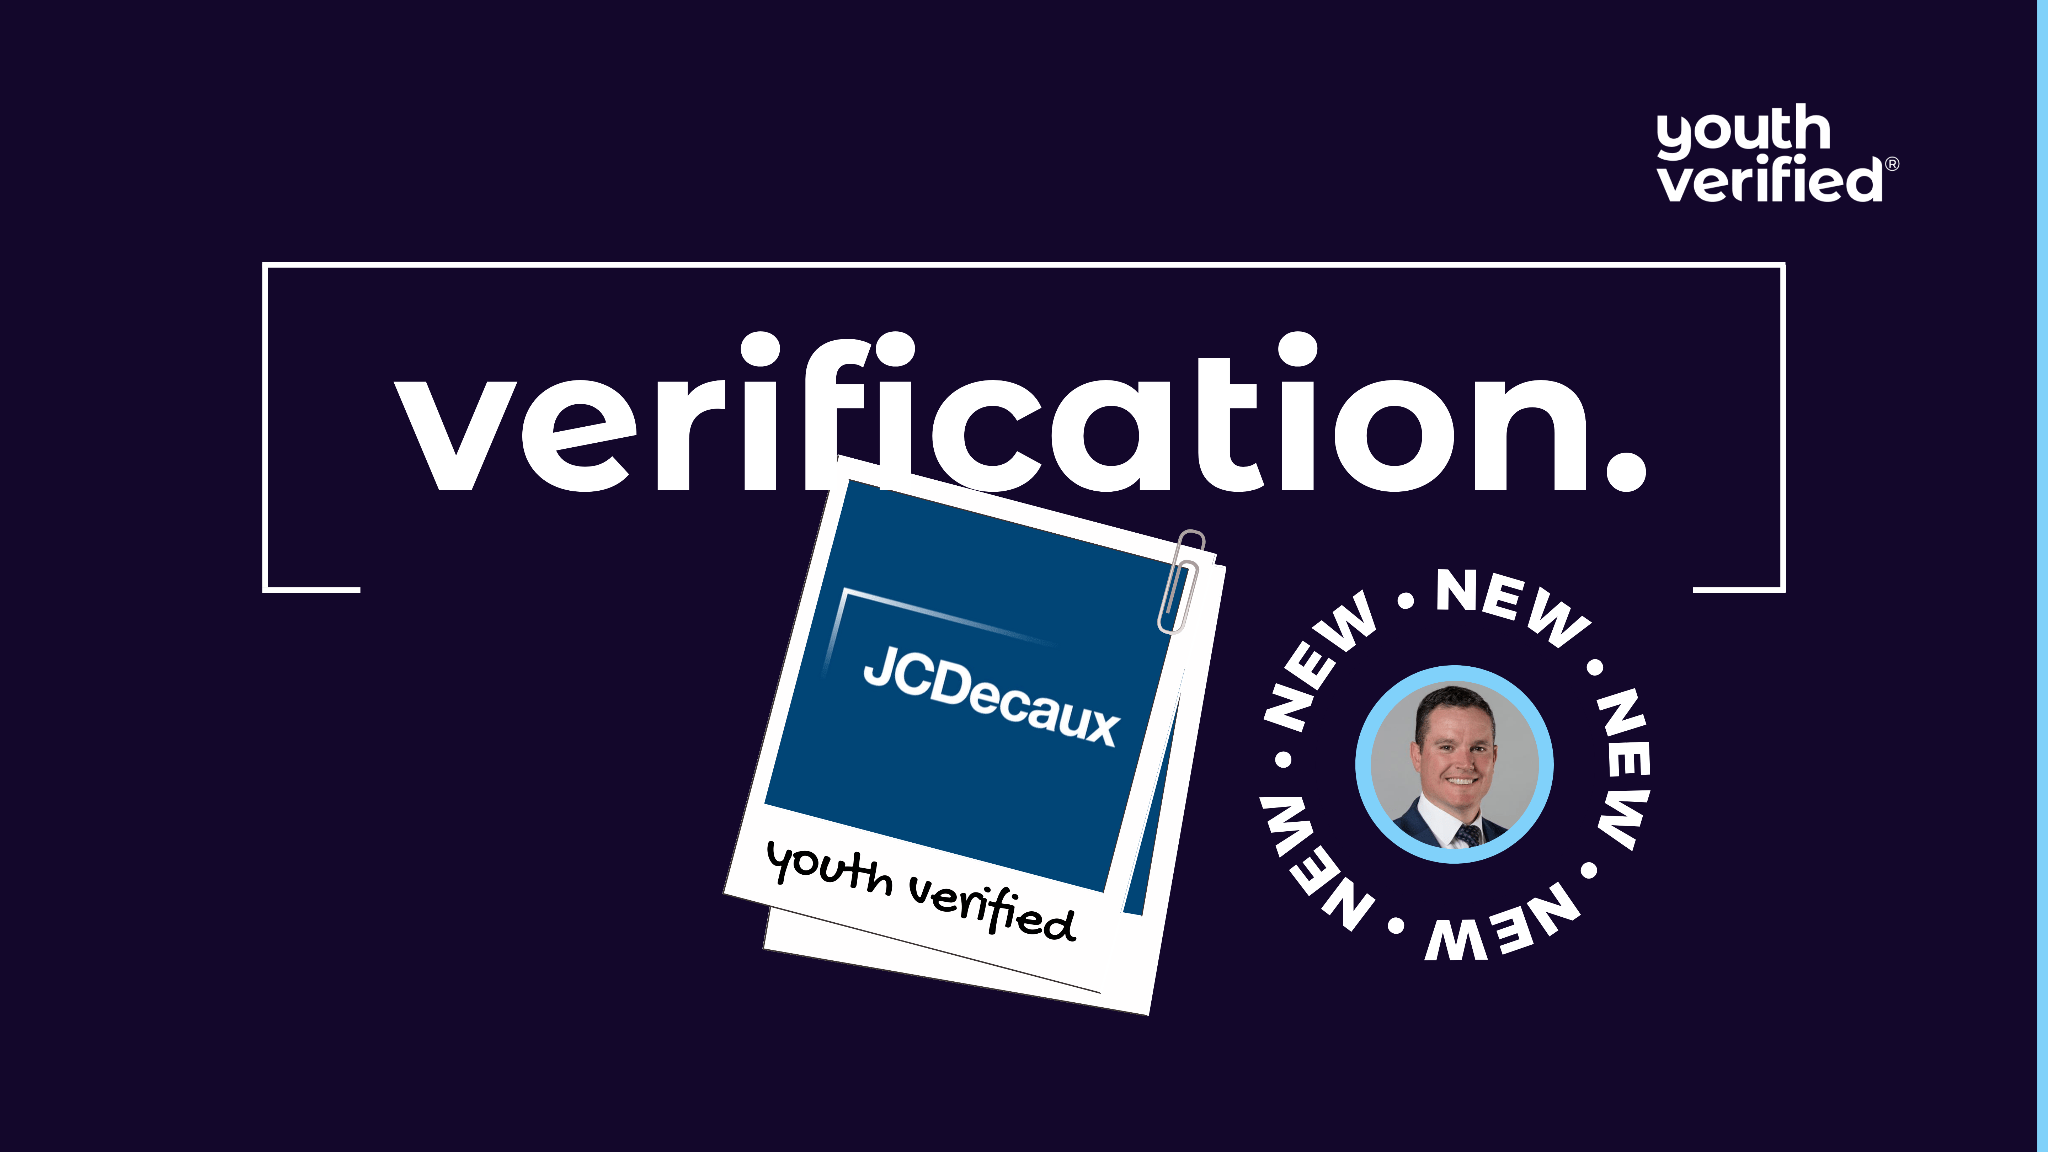 JCDecaux to become Youth Verified® by partnering with Youth Group.